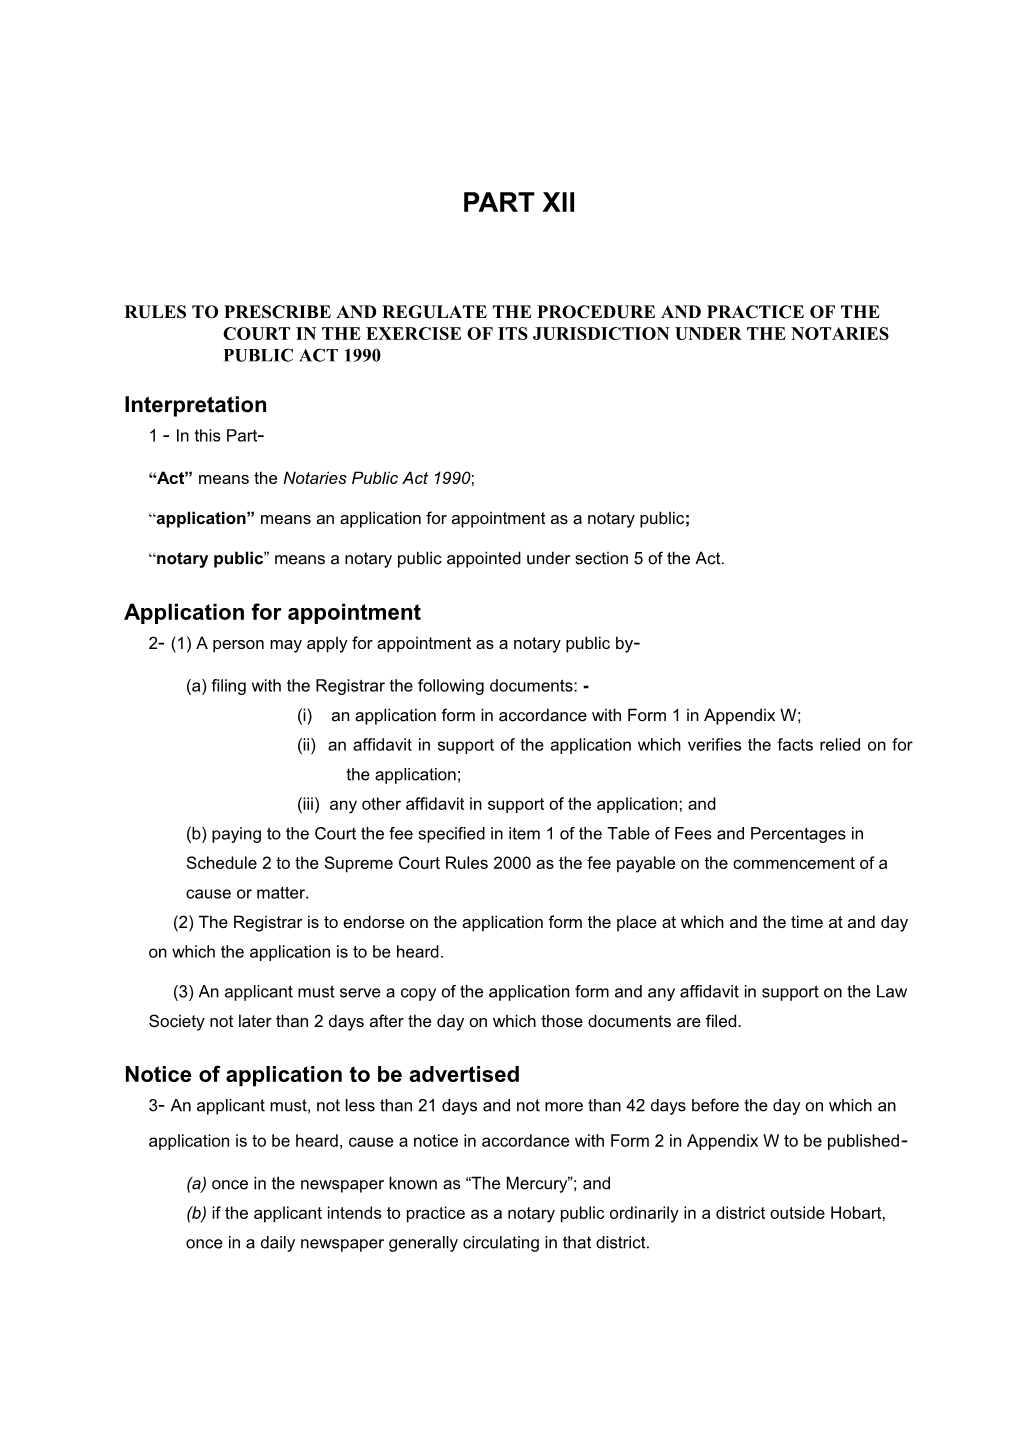 Rules to Prescribe and Regulate the Procedure and Practice of the Court in the Exercise